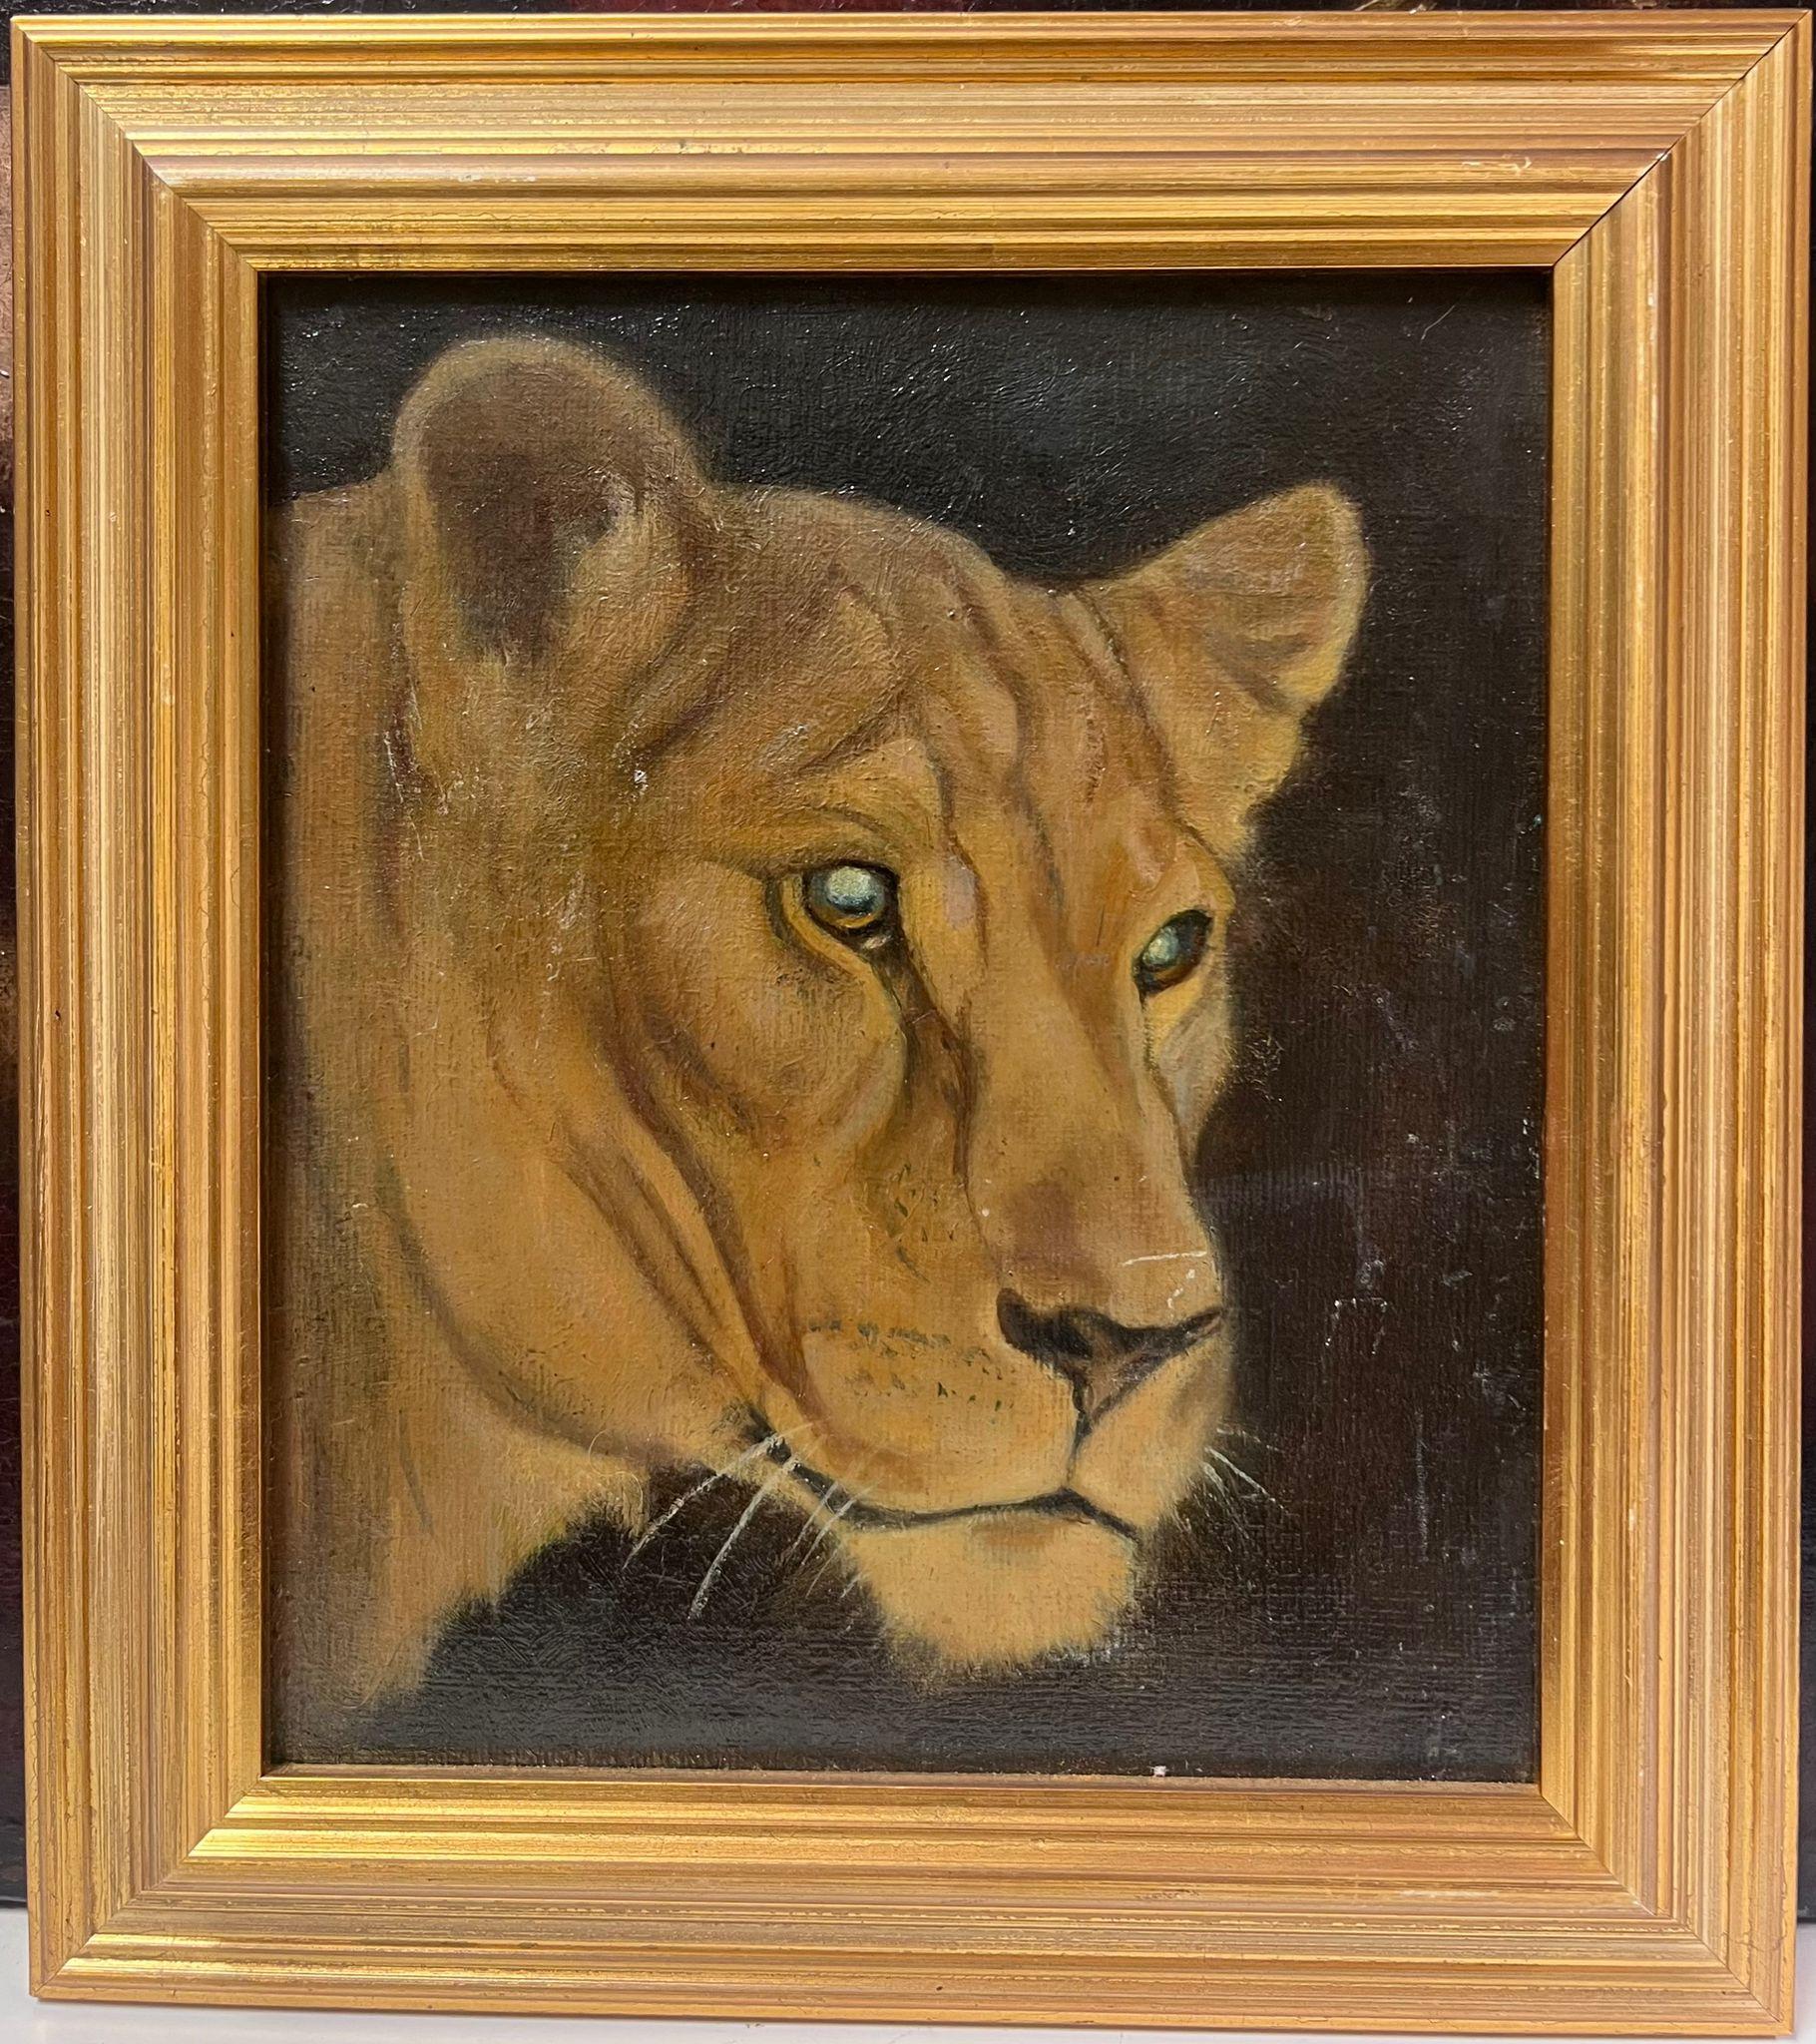 The Lioness
English artist, circa 1930's
oil on board, framed
framed: 10.5 x 9.5 inches
board: 8 x 7 inches
provenance: private collection, UK
condition: overall good and sound